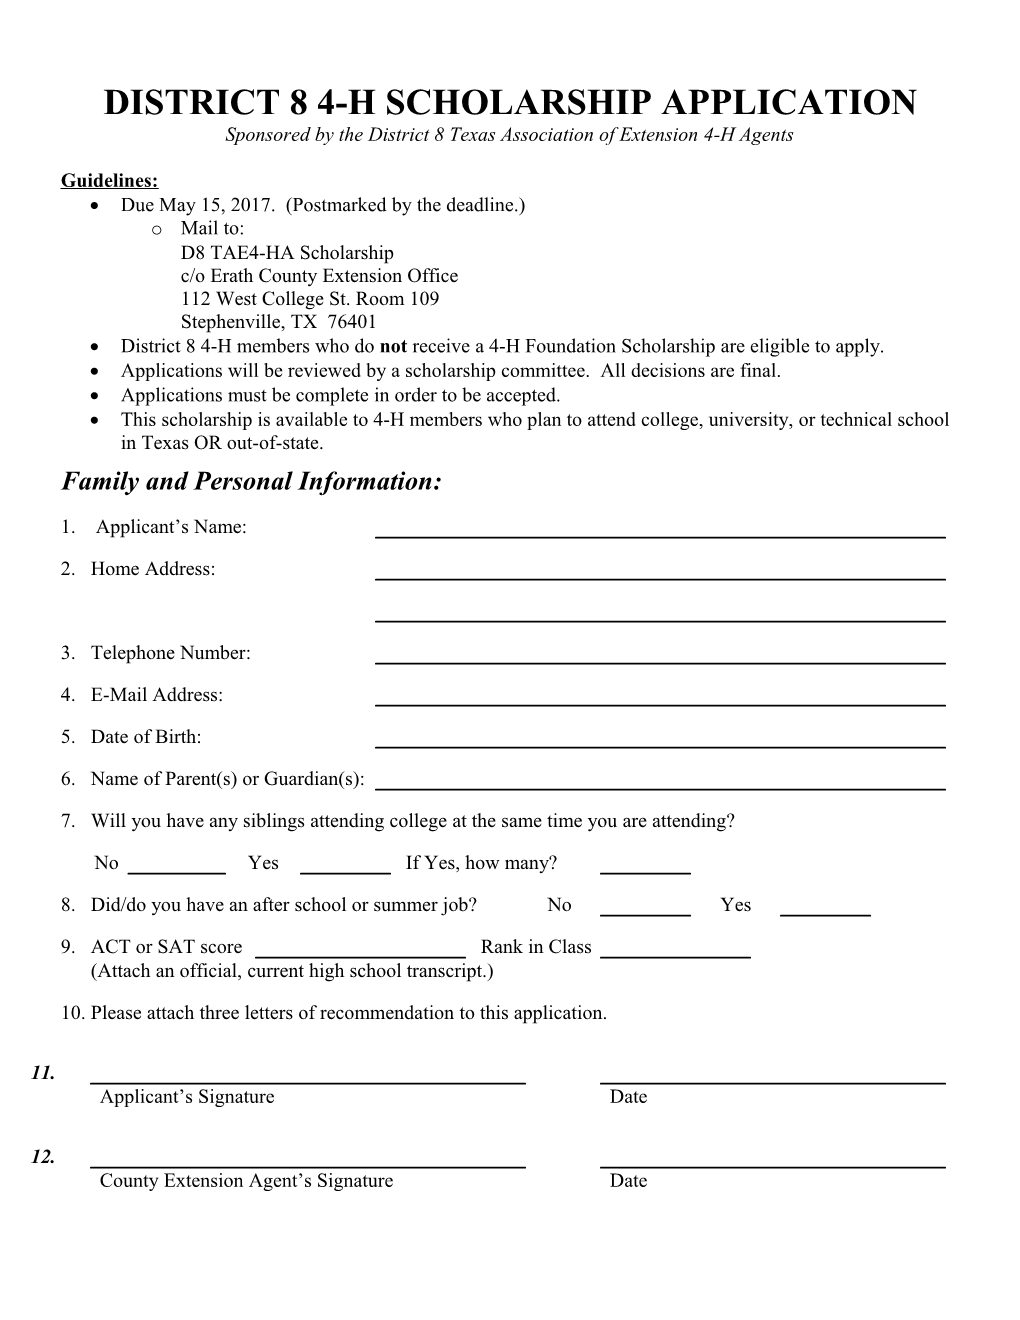 District 8 4-H Scholarship Application s1